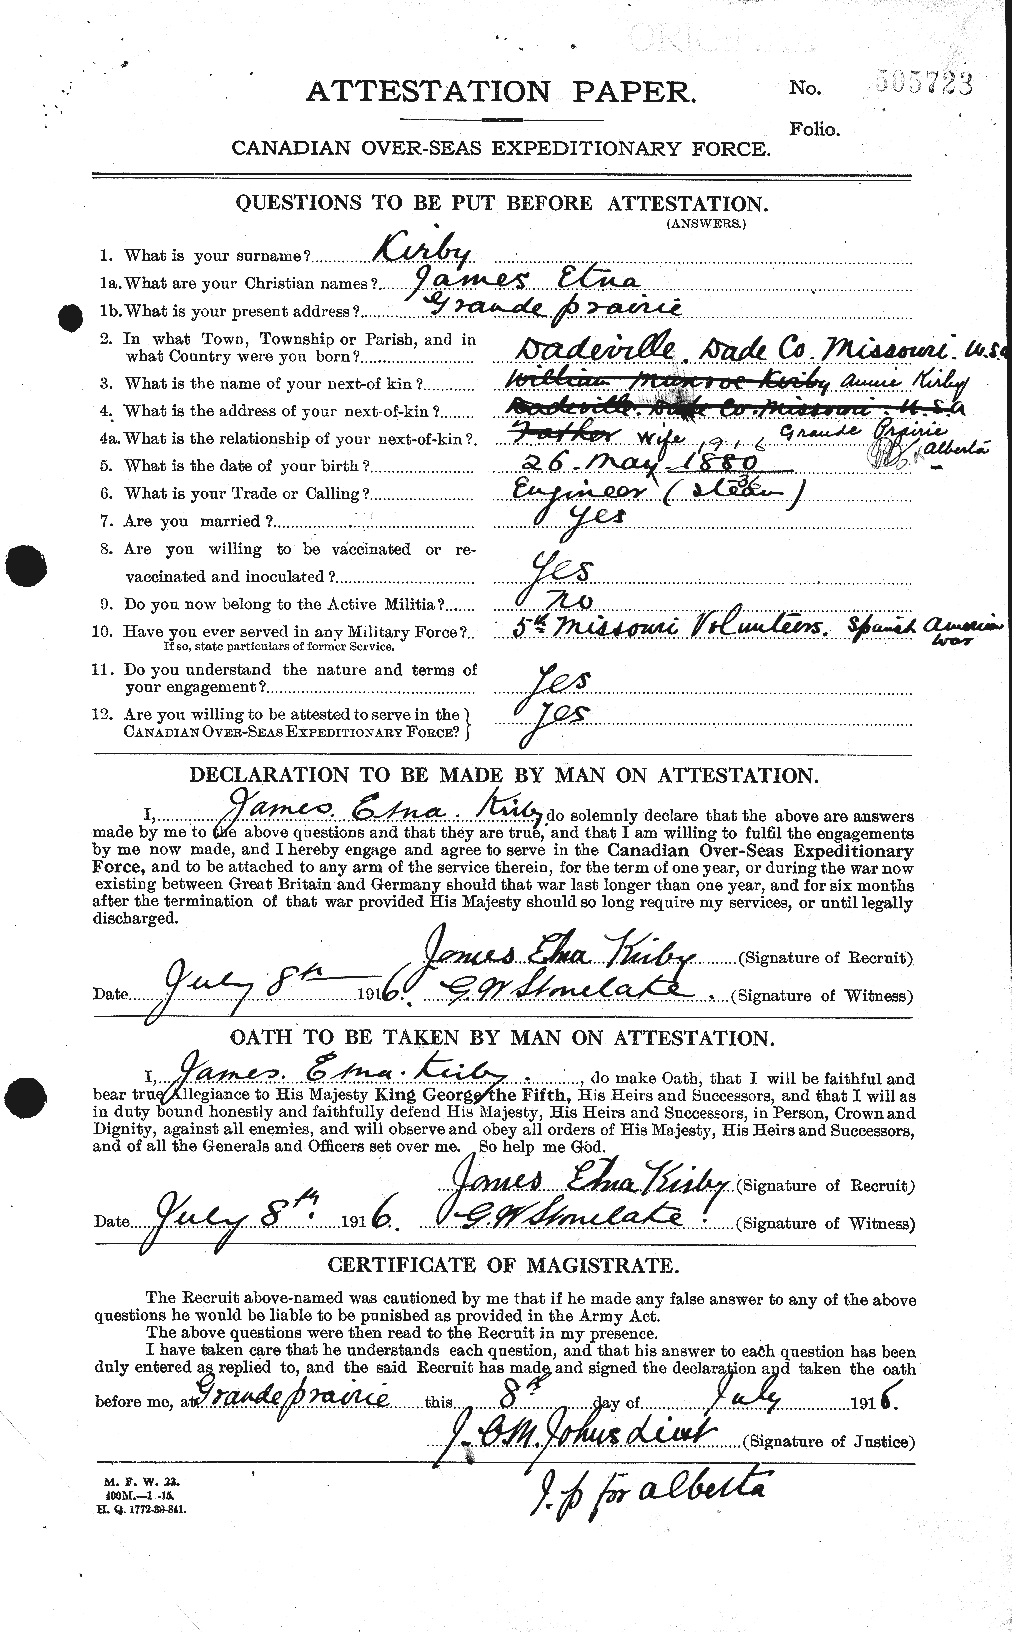 Personnel Records of the First World War - CEF 437219a